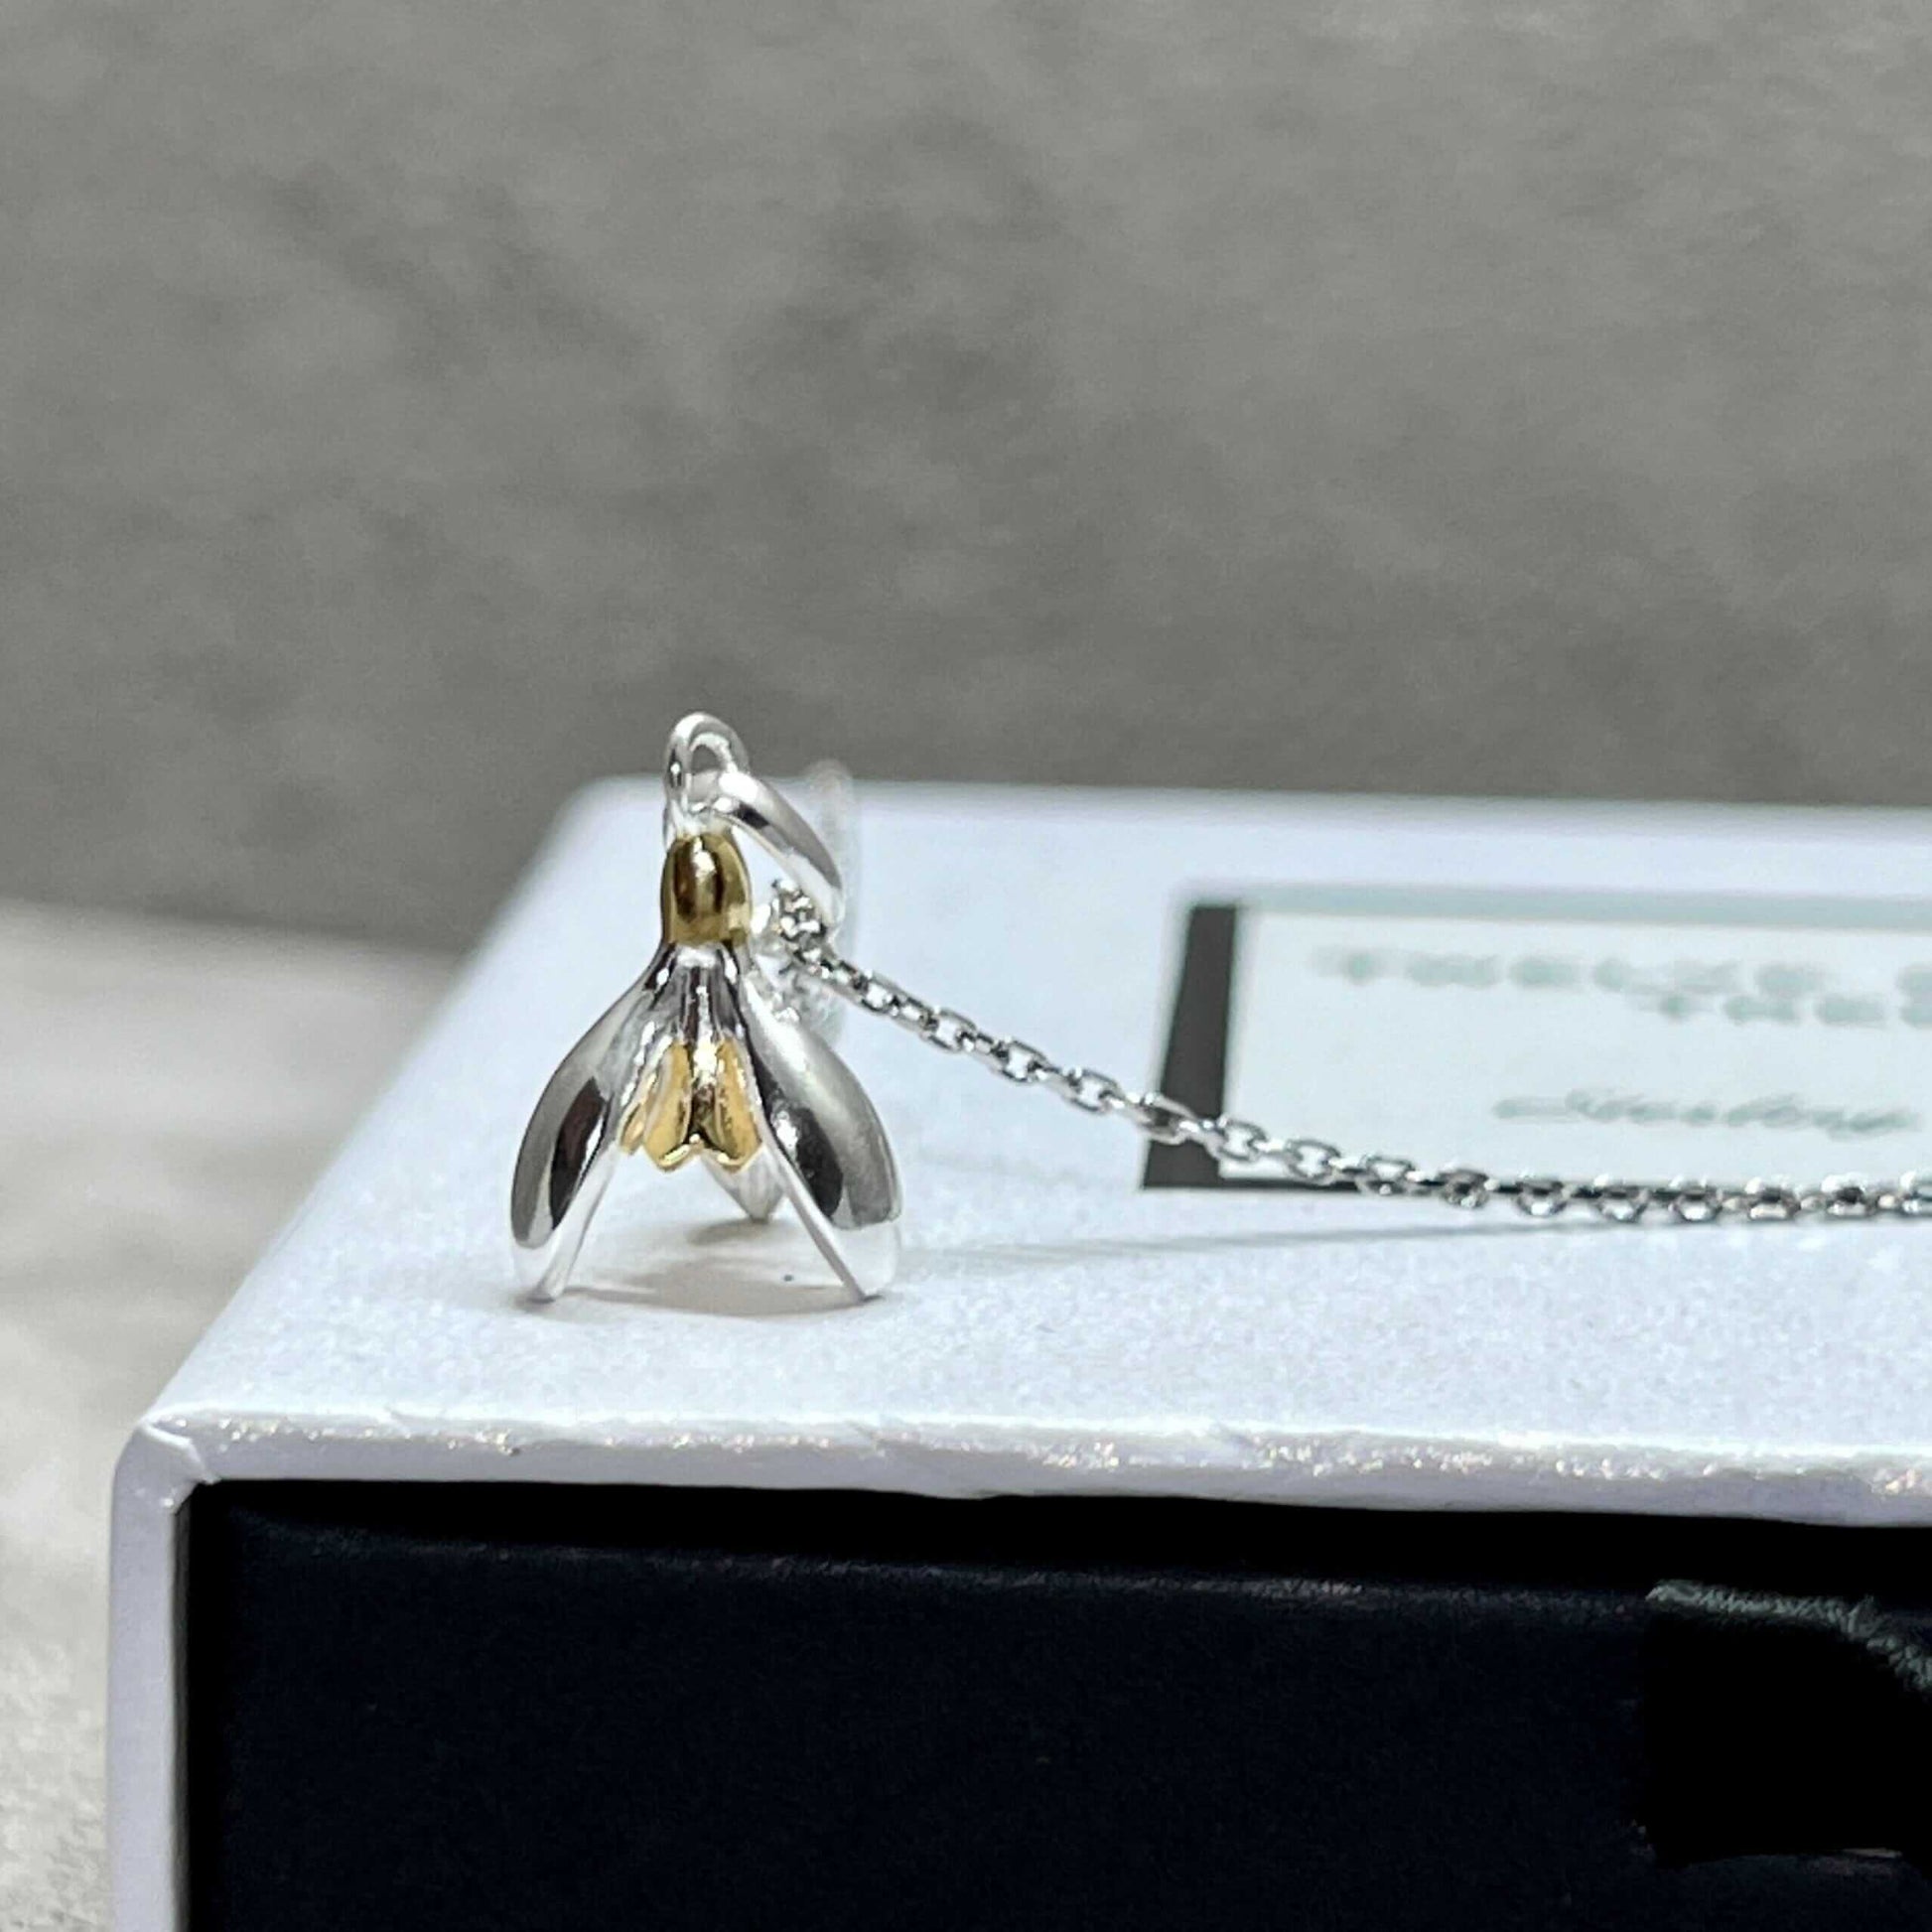 Snowdrop Charm Pendant In Sterling Silver & 18 Carat Gold - Twelve Silver Trees